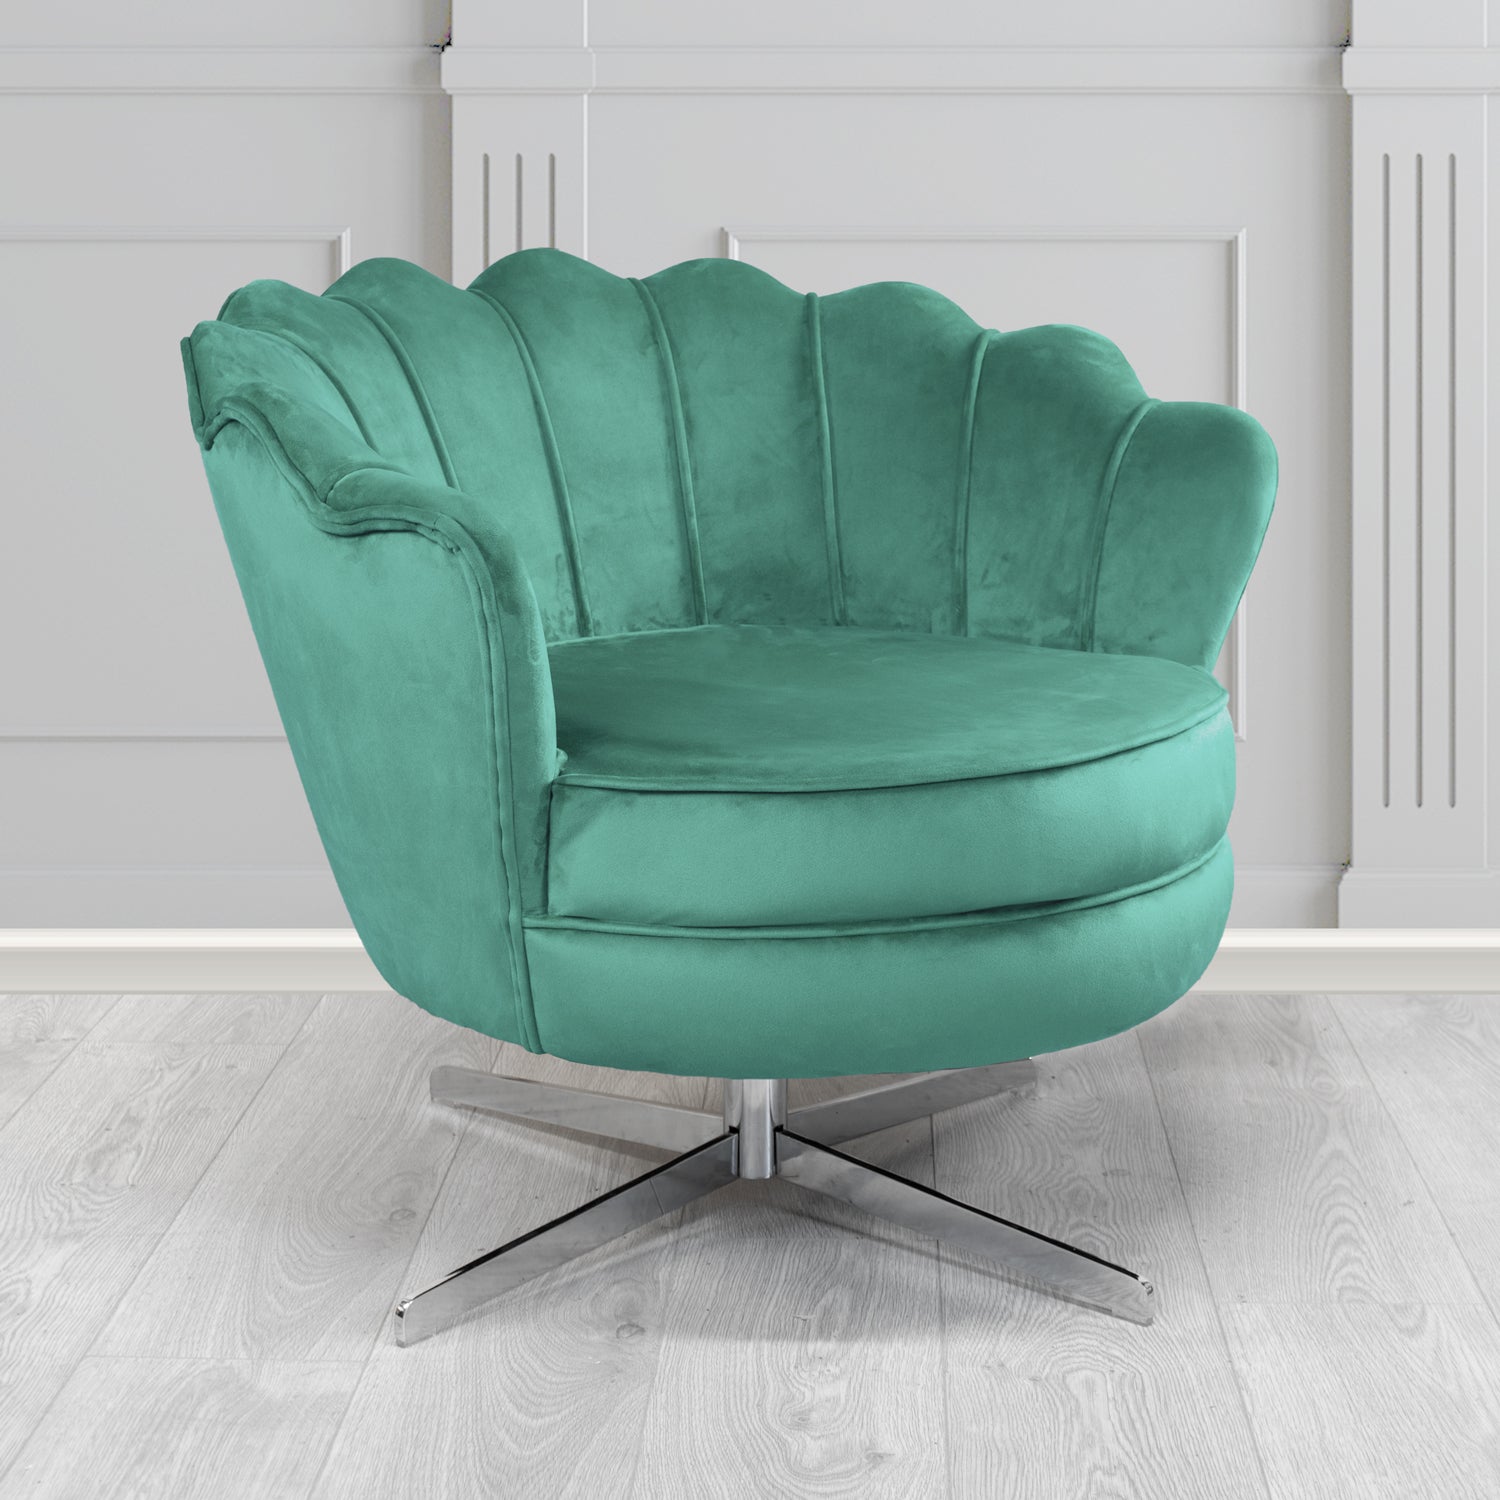 Olivia Passione Teal PAS2717 Velvet Fabric Shell Swivel Tub Chair (4681161801770)